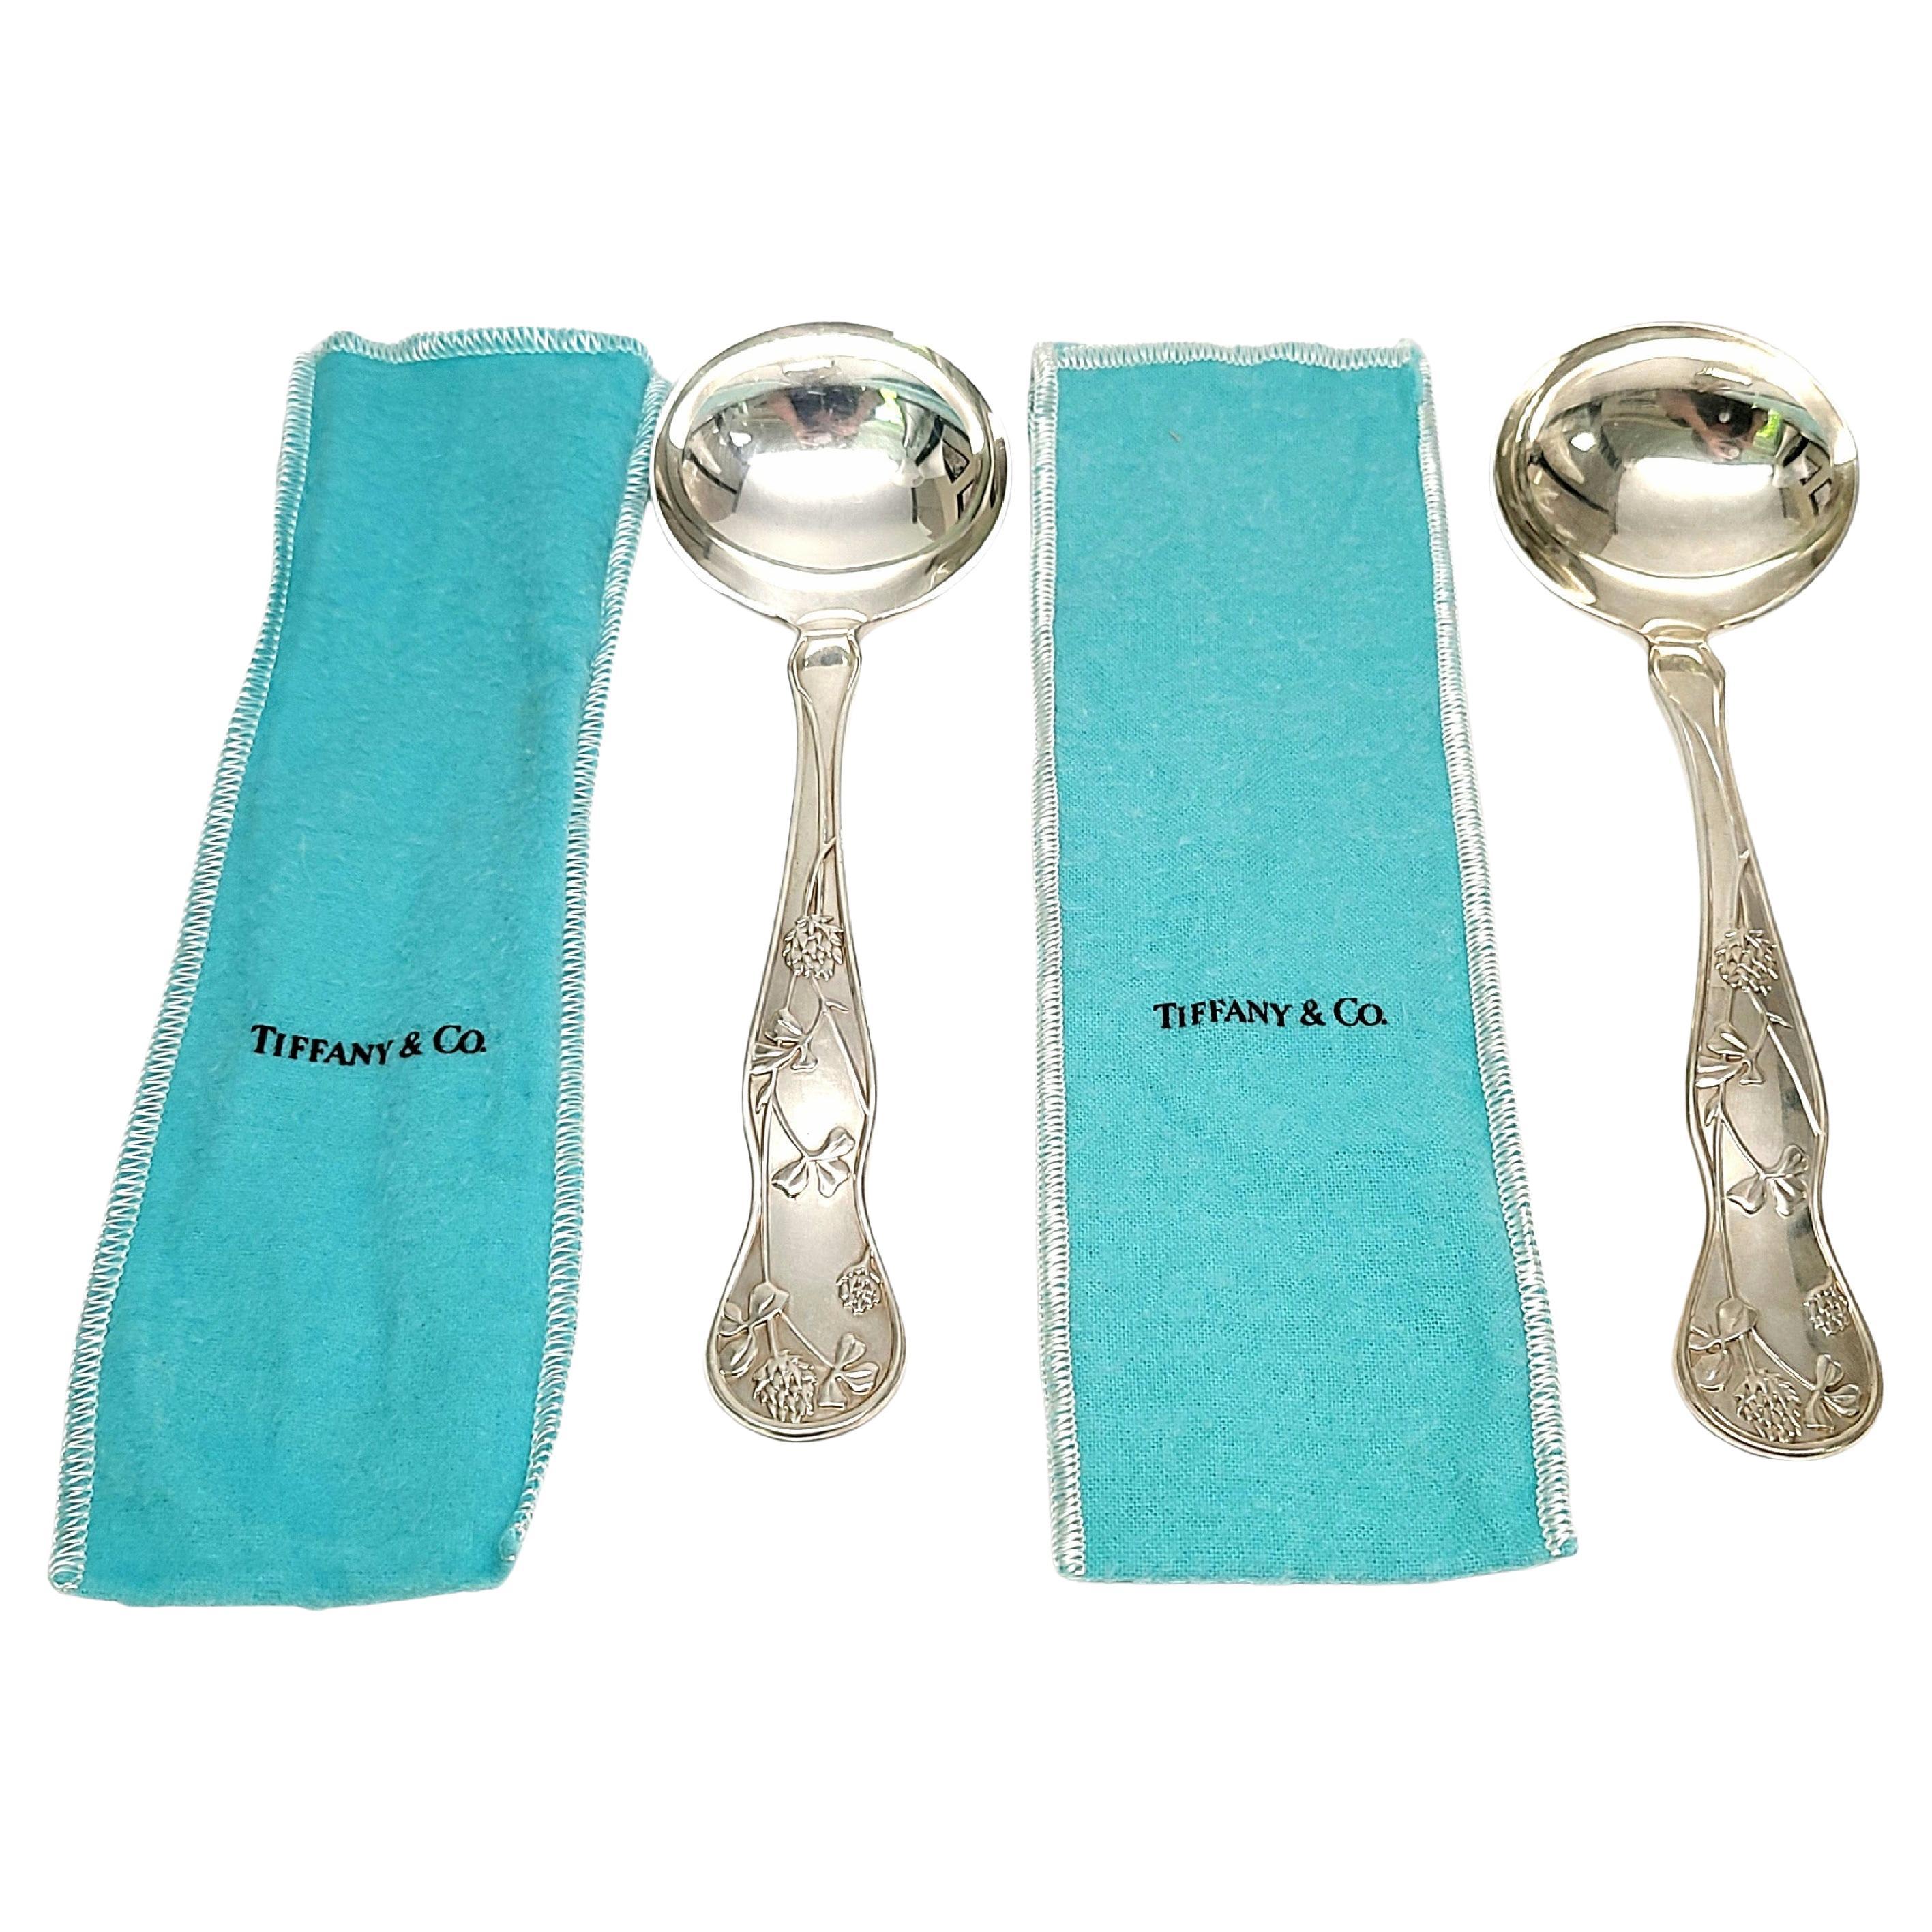 Set of 2 Tiffany & Co American Garden Sterling Silver Gravy Ladles with Pouches